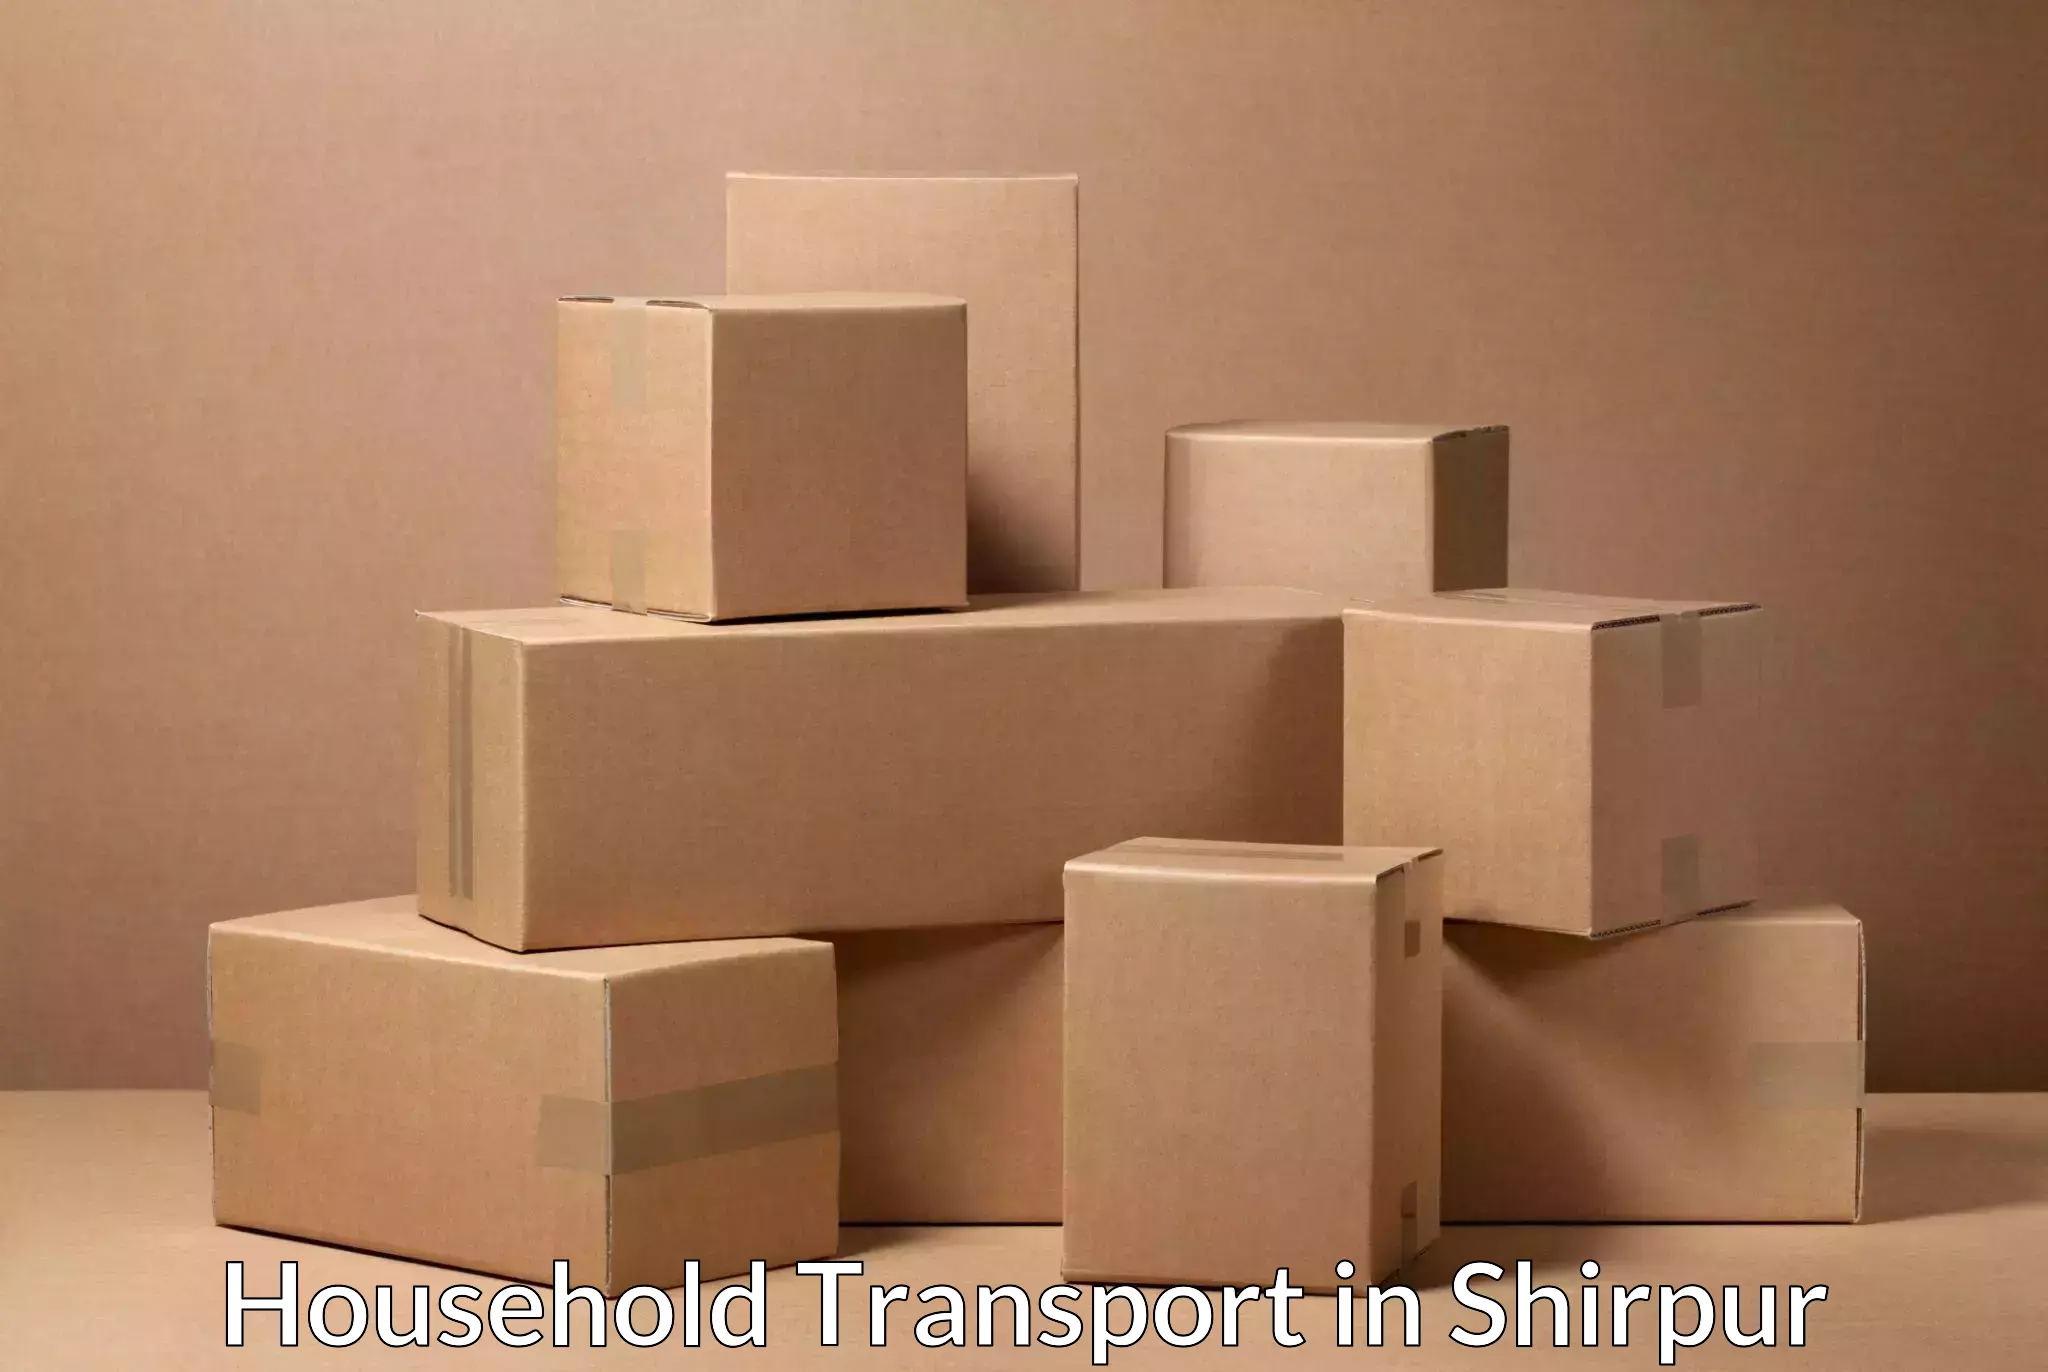 Professional relocation services in Shirpur